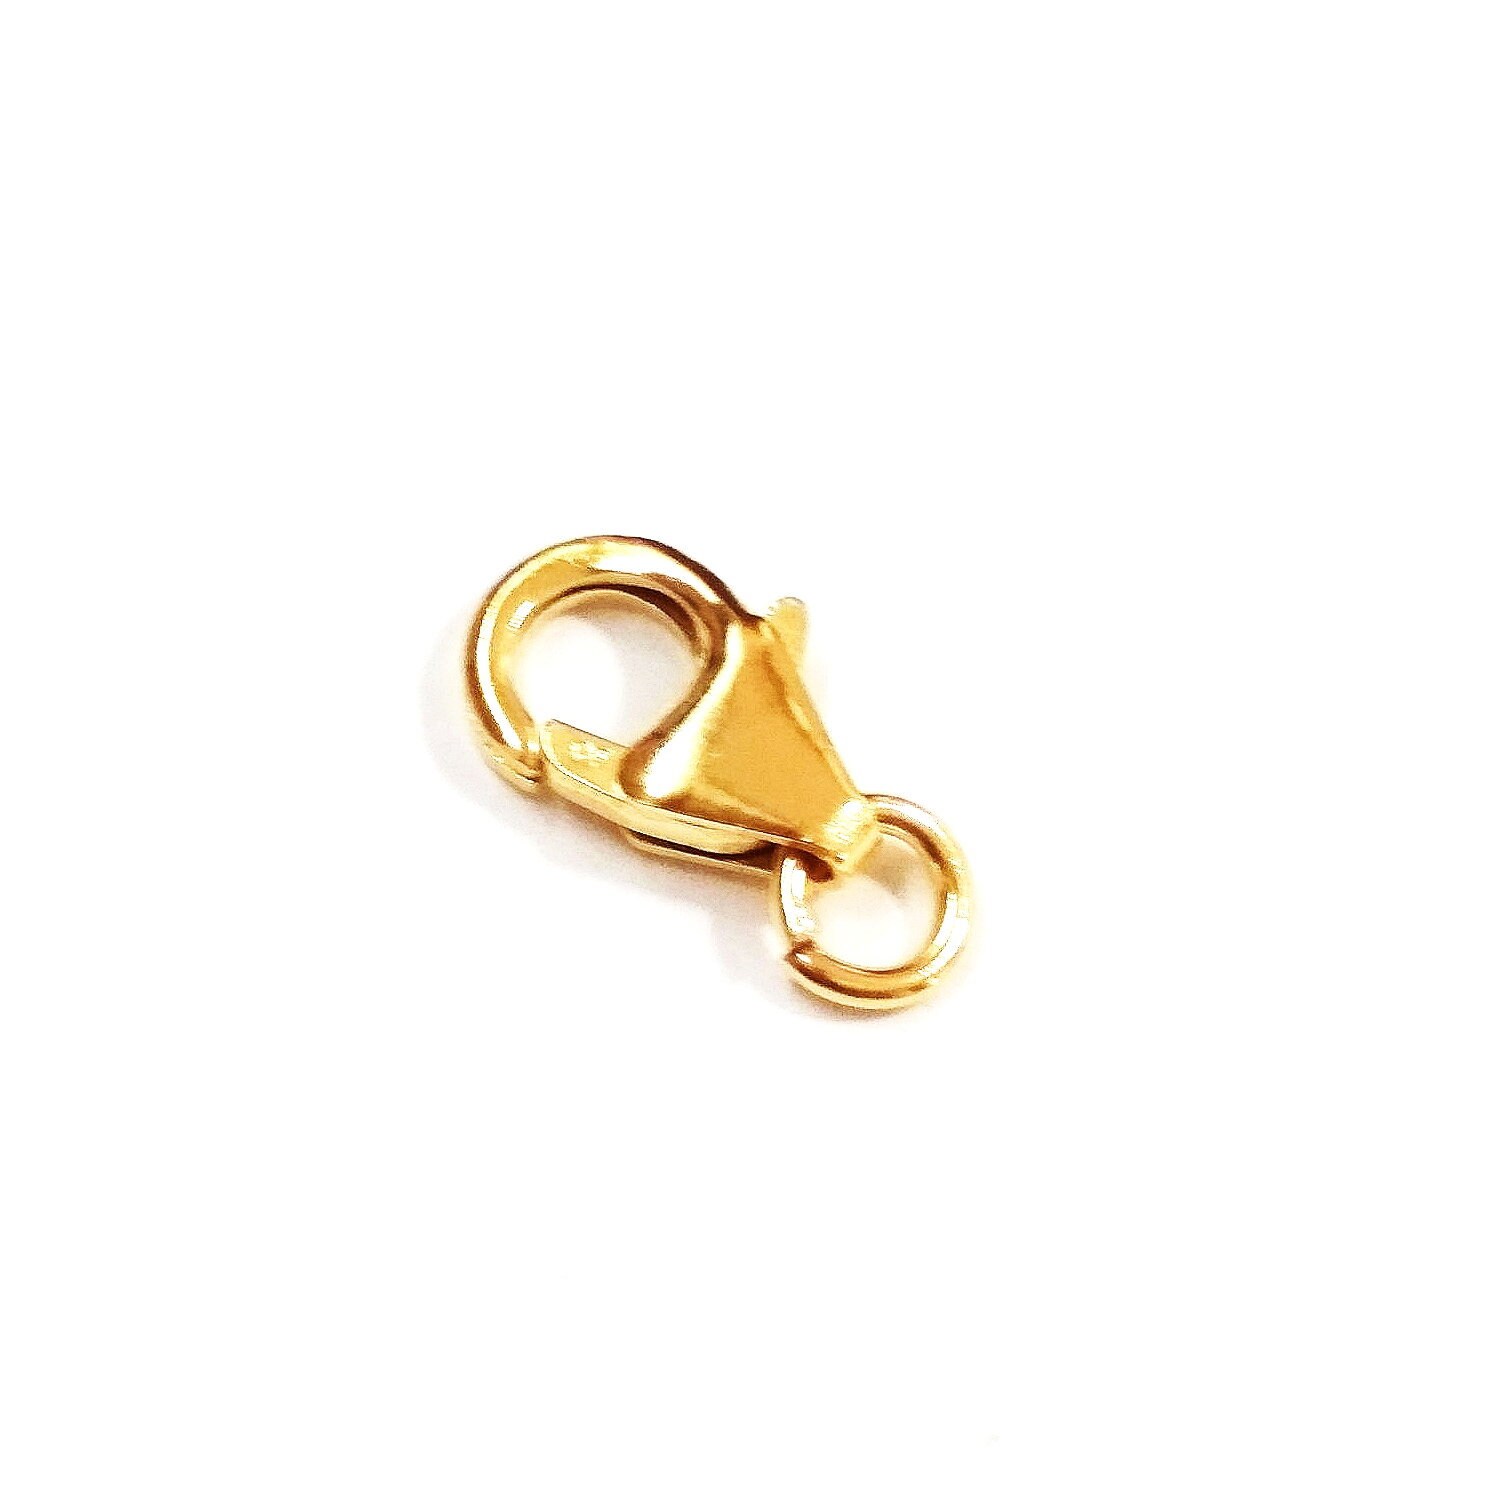 5 pcs 14kt GOLD FILLED 9mm Pear Shape Trigger LOBSTER CLAW CLASPS w/ Jump Rings 